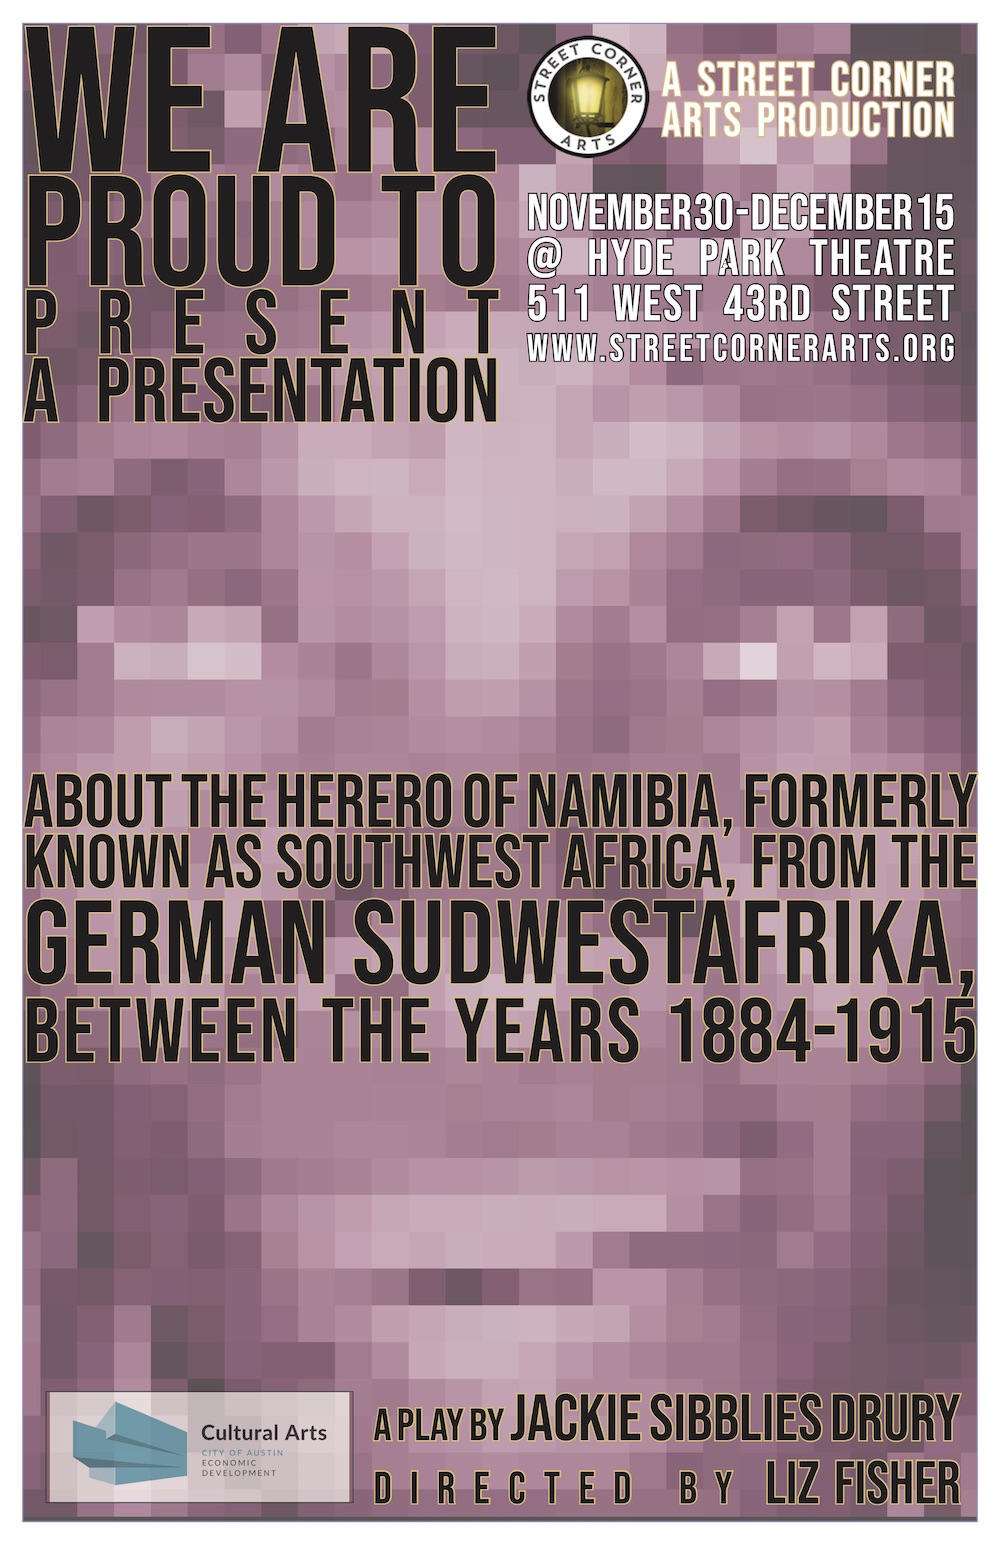 We Are Proud to Present a Presentation About the Herero of Namibia. . . by Street Corner Arts